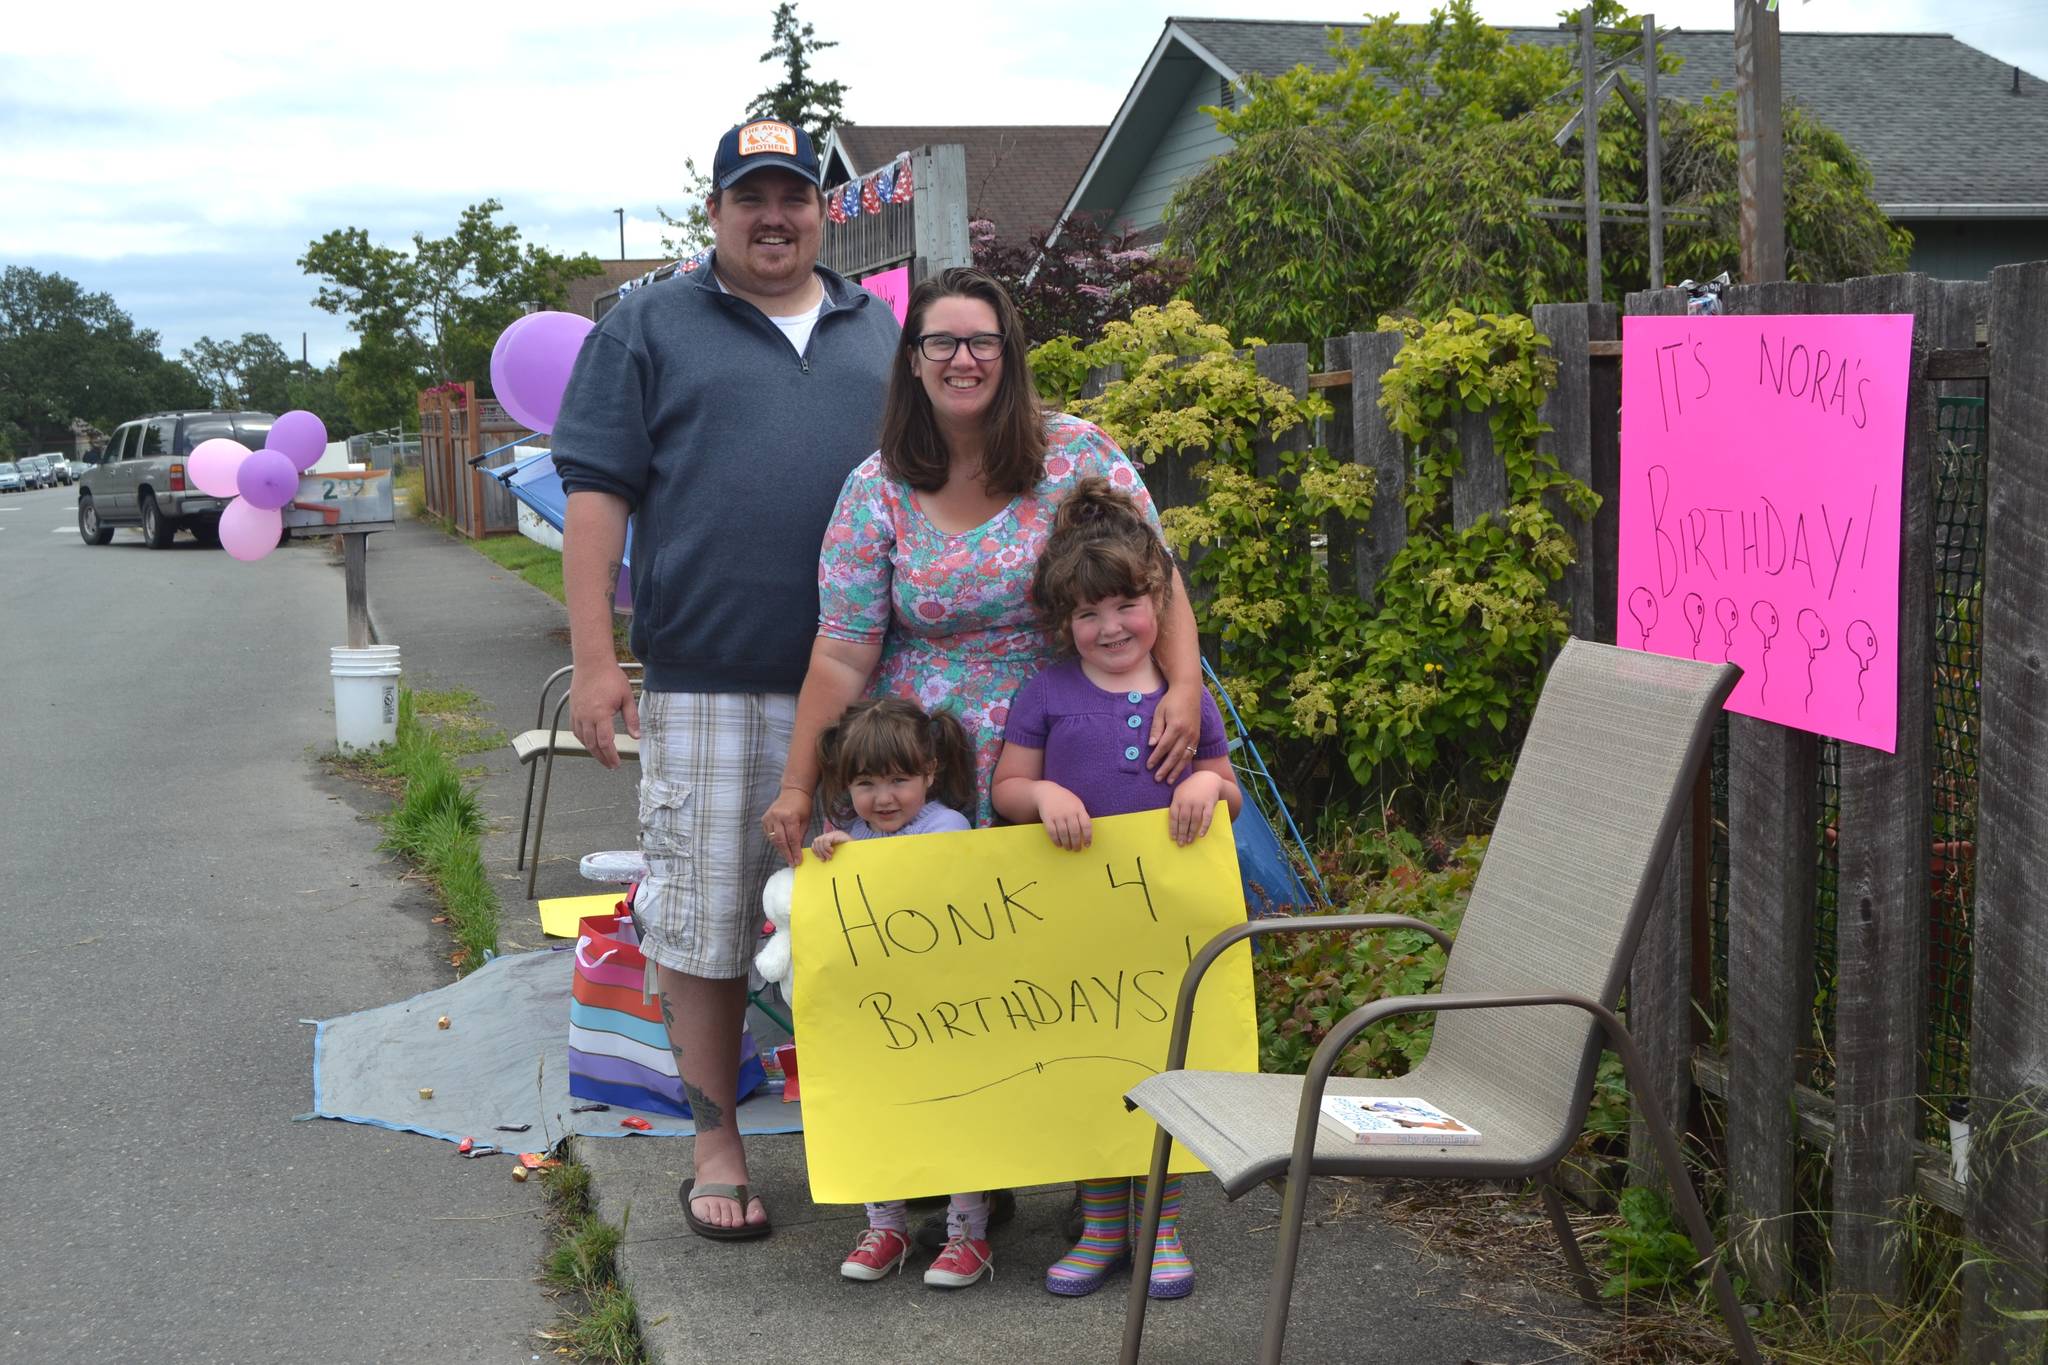 On June 20, the Hannam family sat outside their downtown Sequim home waving to cars in honor of Nora’s third birthday, See story on Page 3. Sequim Gazette photo by Matthew Nash